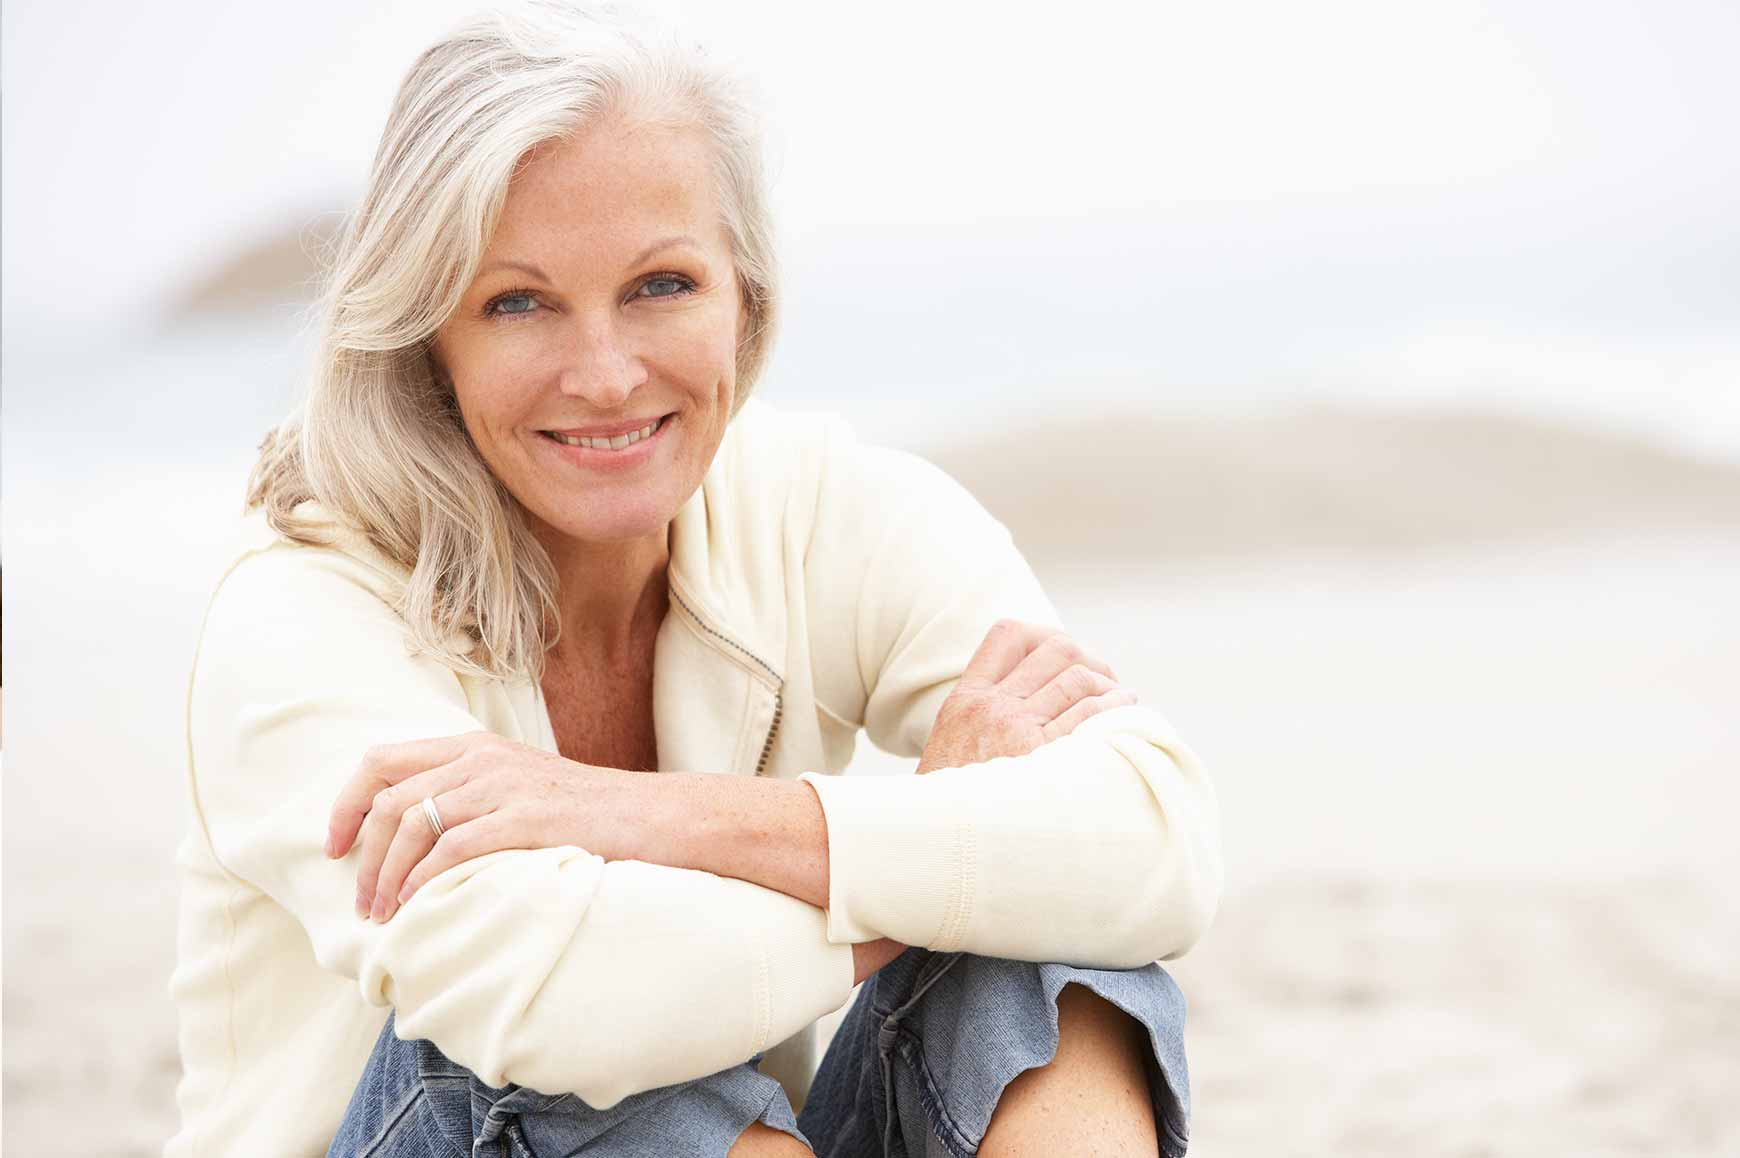 A facelift procedure requires Dr. Melissa Marks to remove extra facial skin around the jaw.